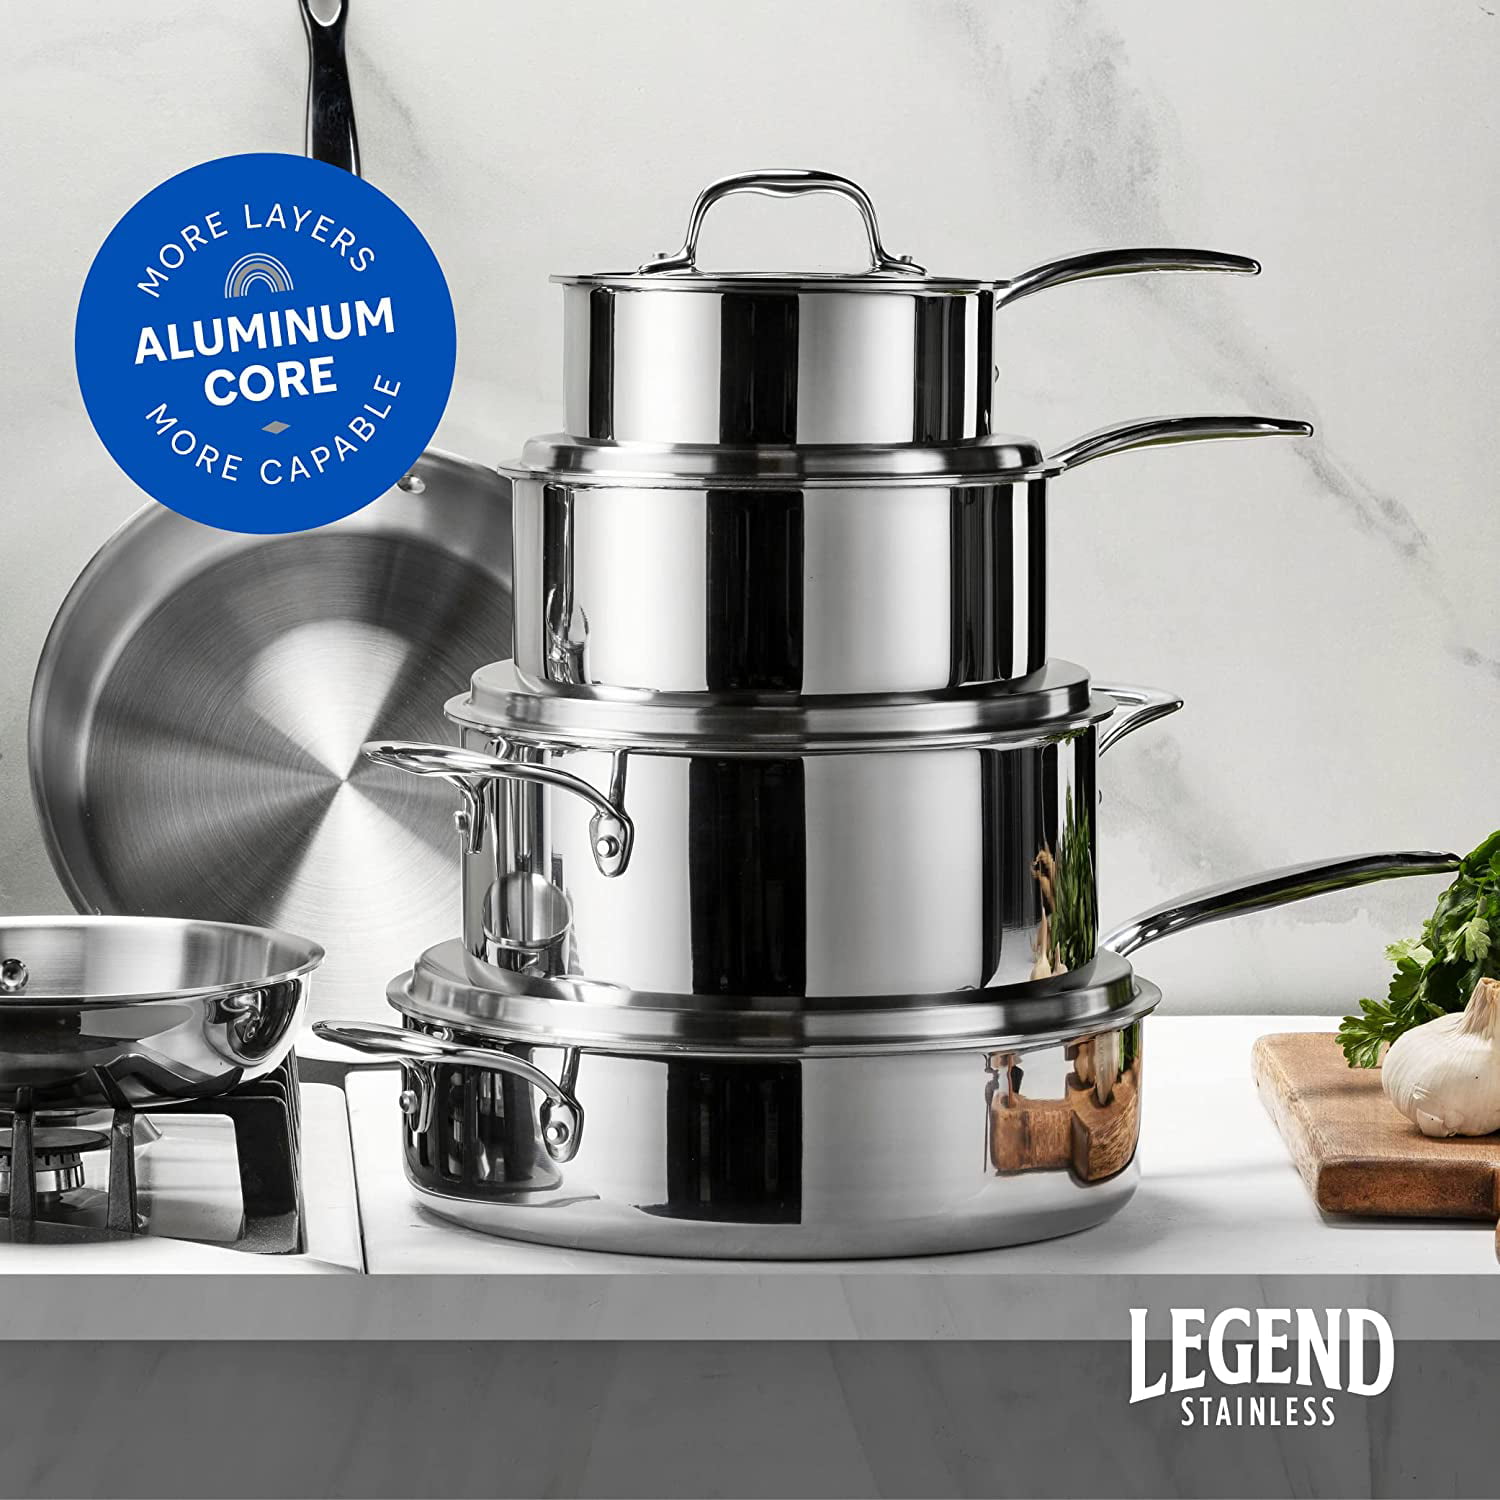  Legend 14 pc Copper Core Stainless Steel Pots & Pans Set, Pro  Quality 5-Ply Clad Cookware, Professional Chef Grade Home Cooking, All  Kitchen Induction & Oven Dishwasher Safe